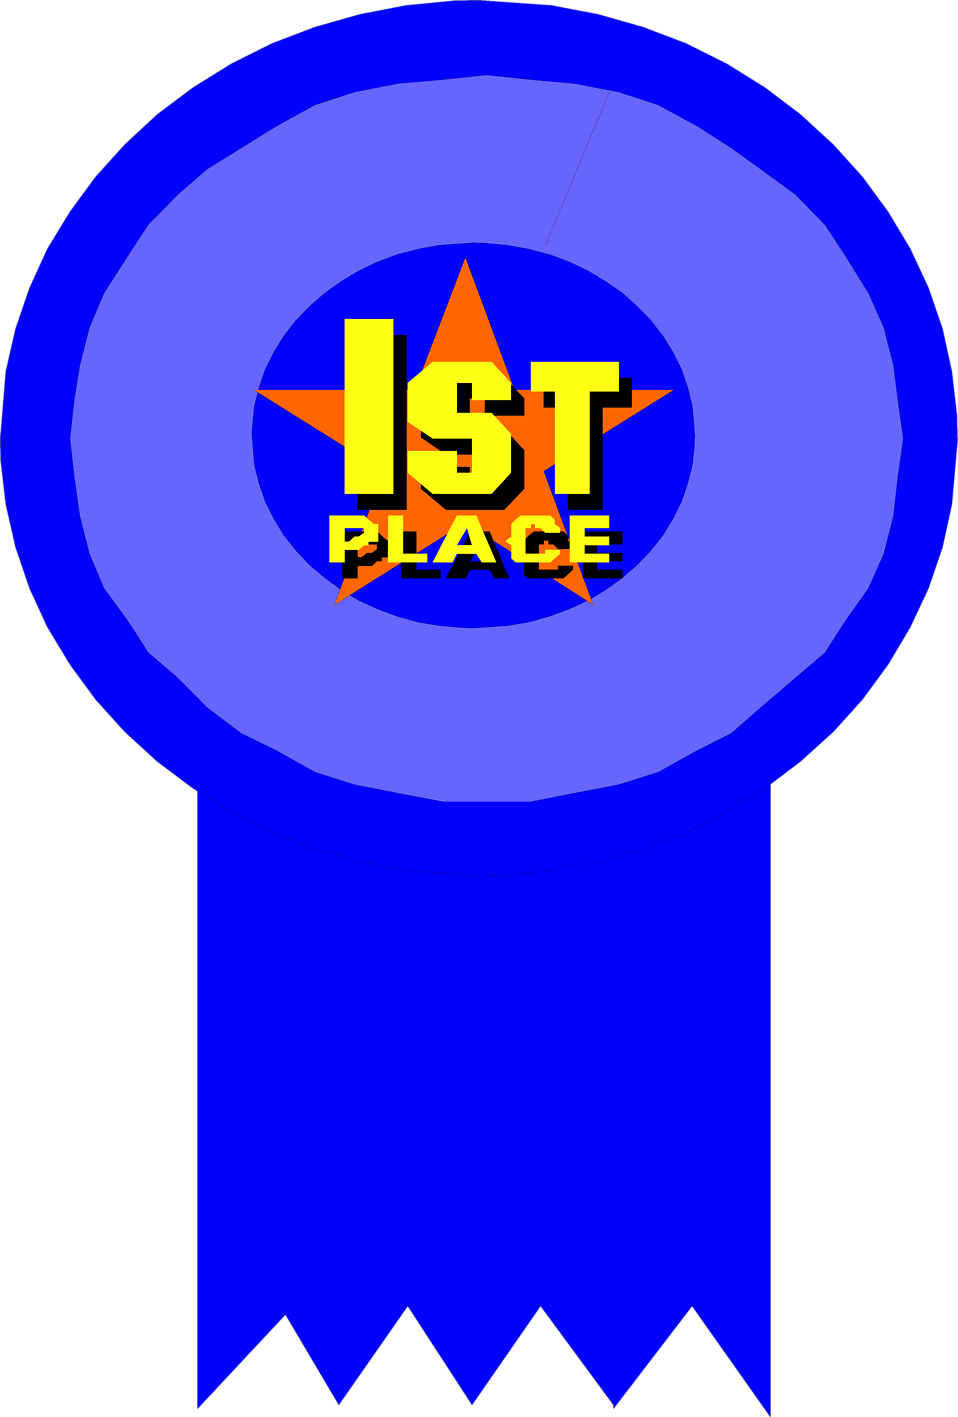 1st Place Award Ribbon Clipart - Free Clipart Images